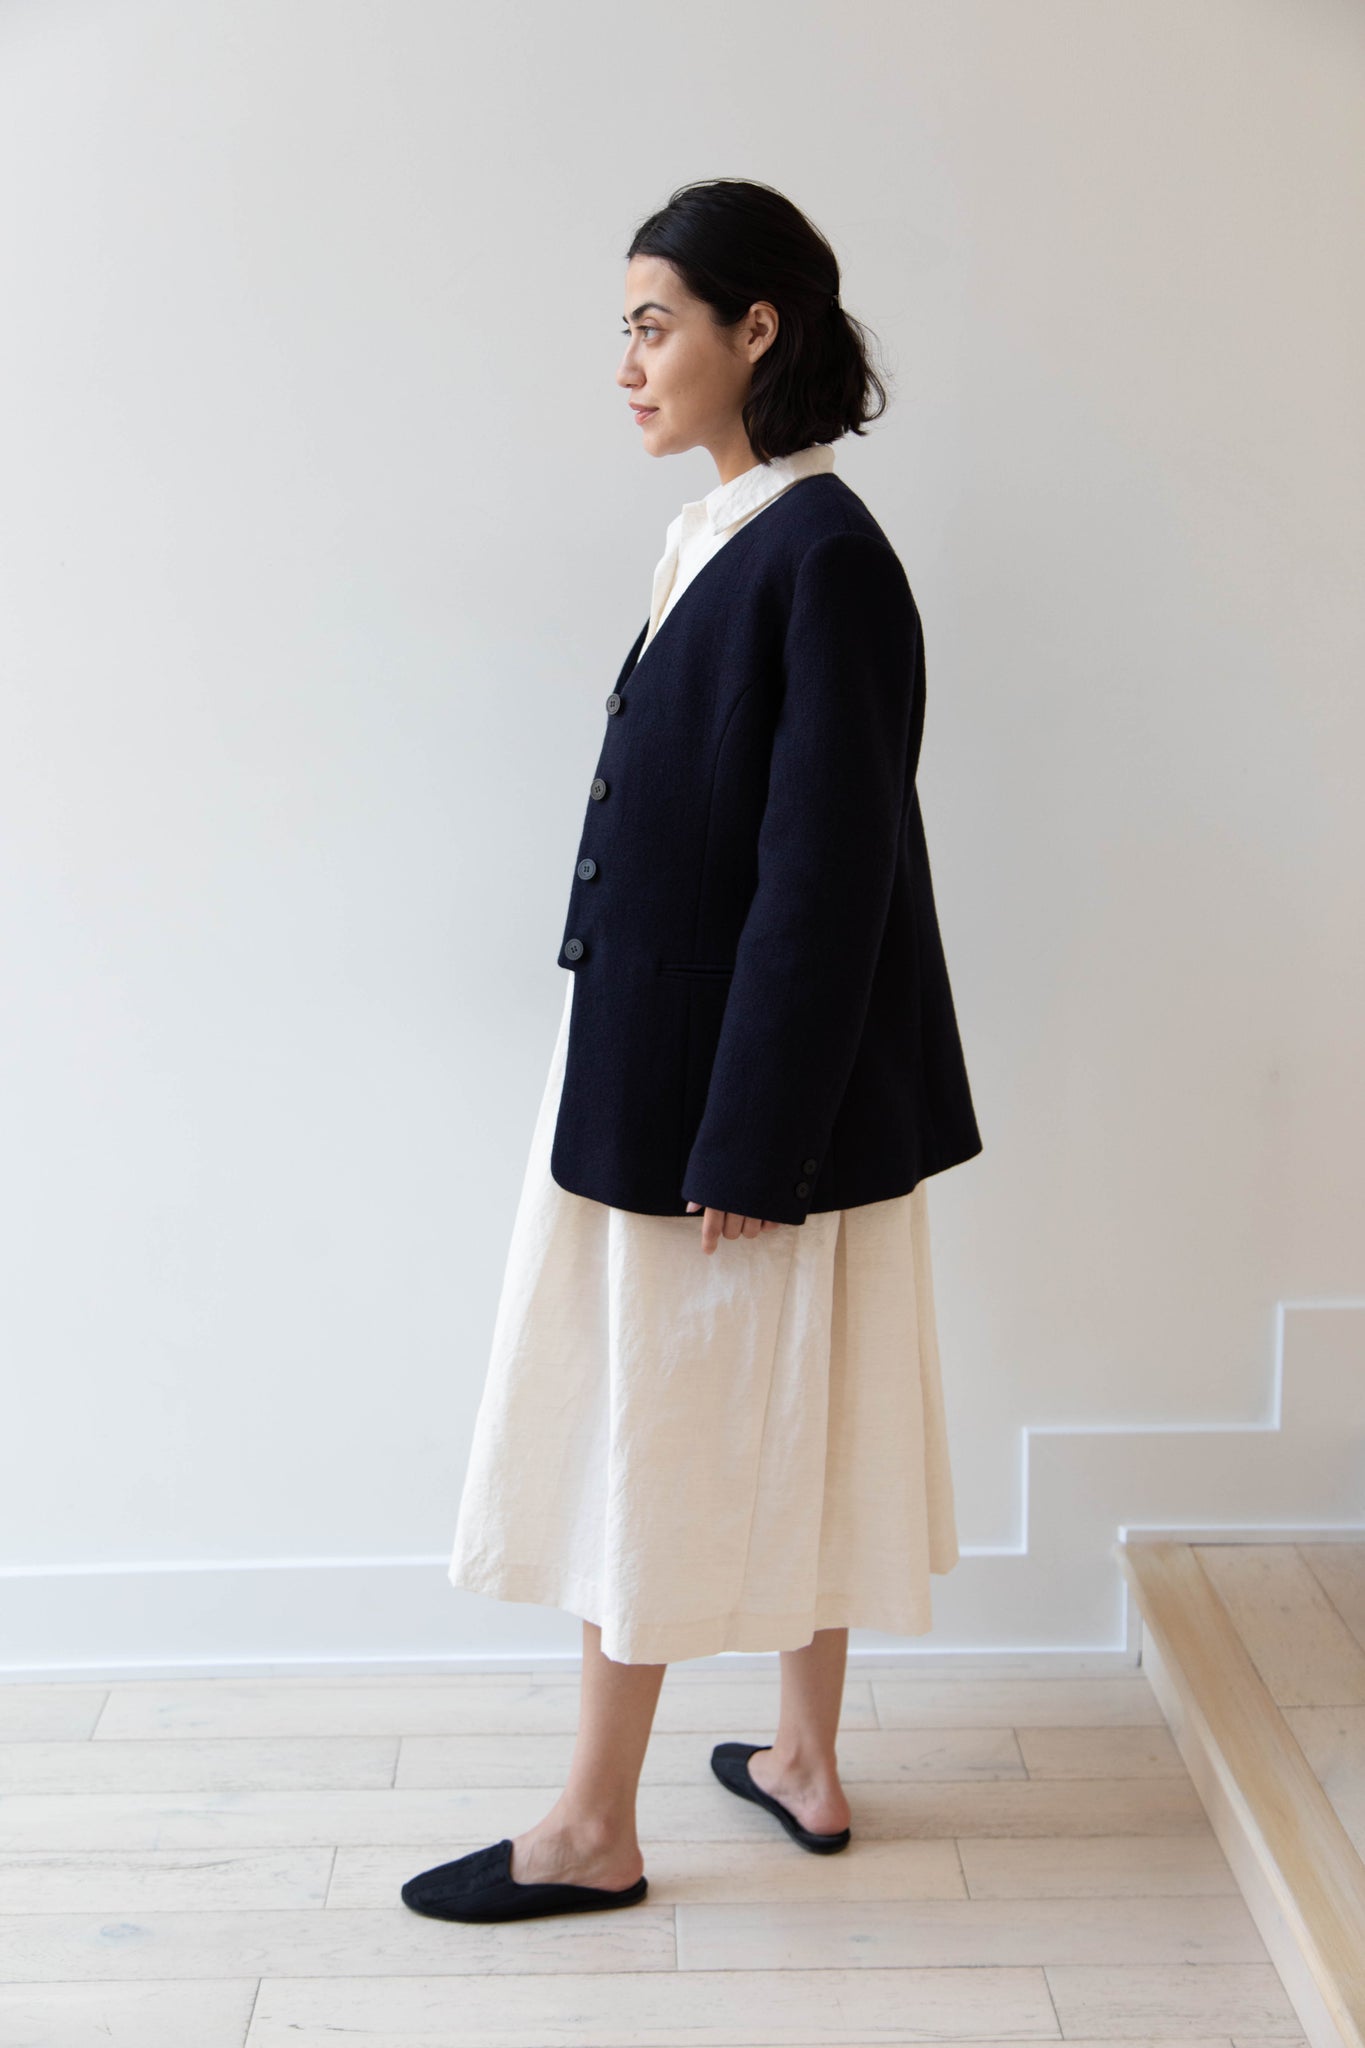 Le 17 Septembre | Formal Jacket in Navy Wool